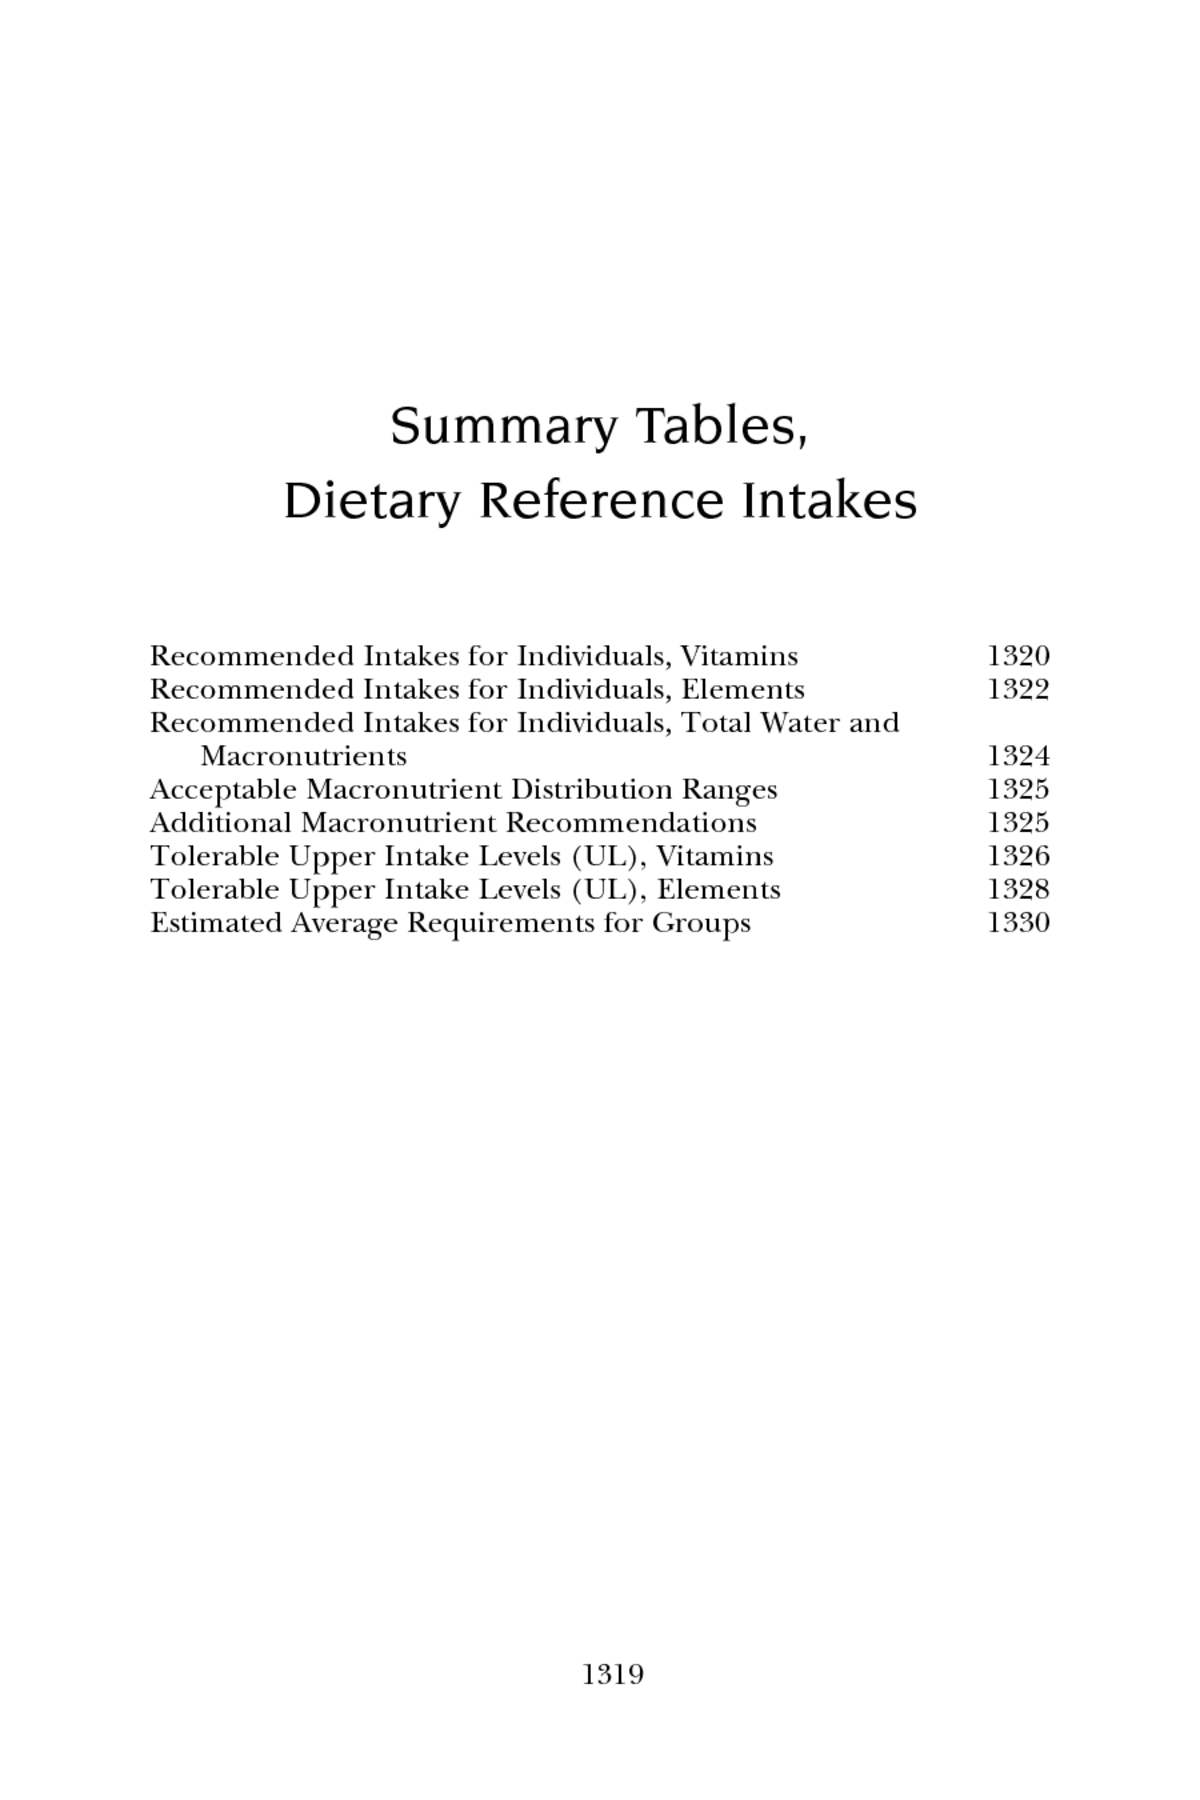 Dietary Reference Intakes Chart